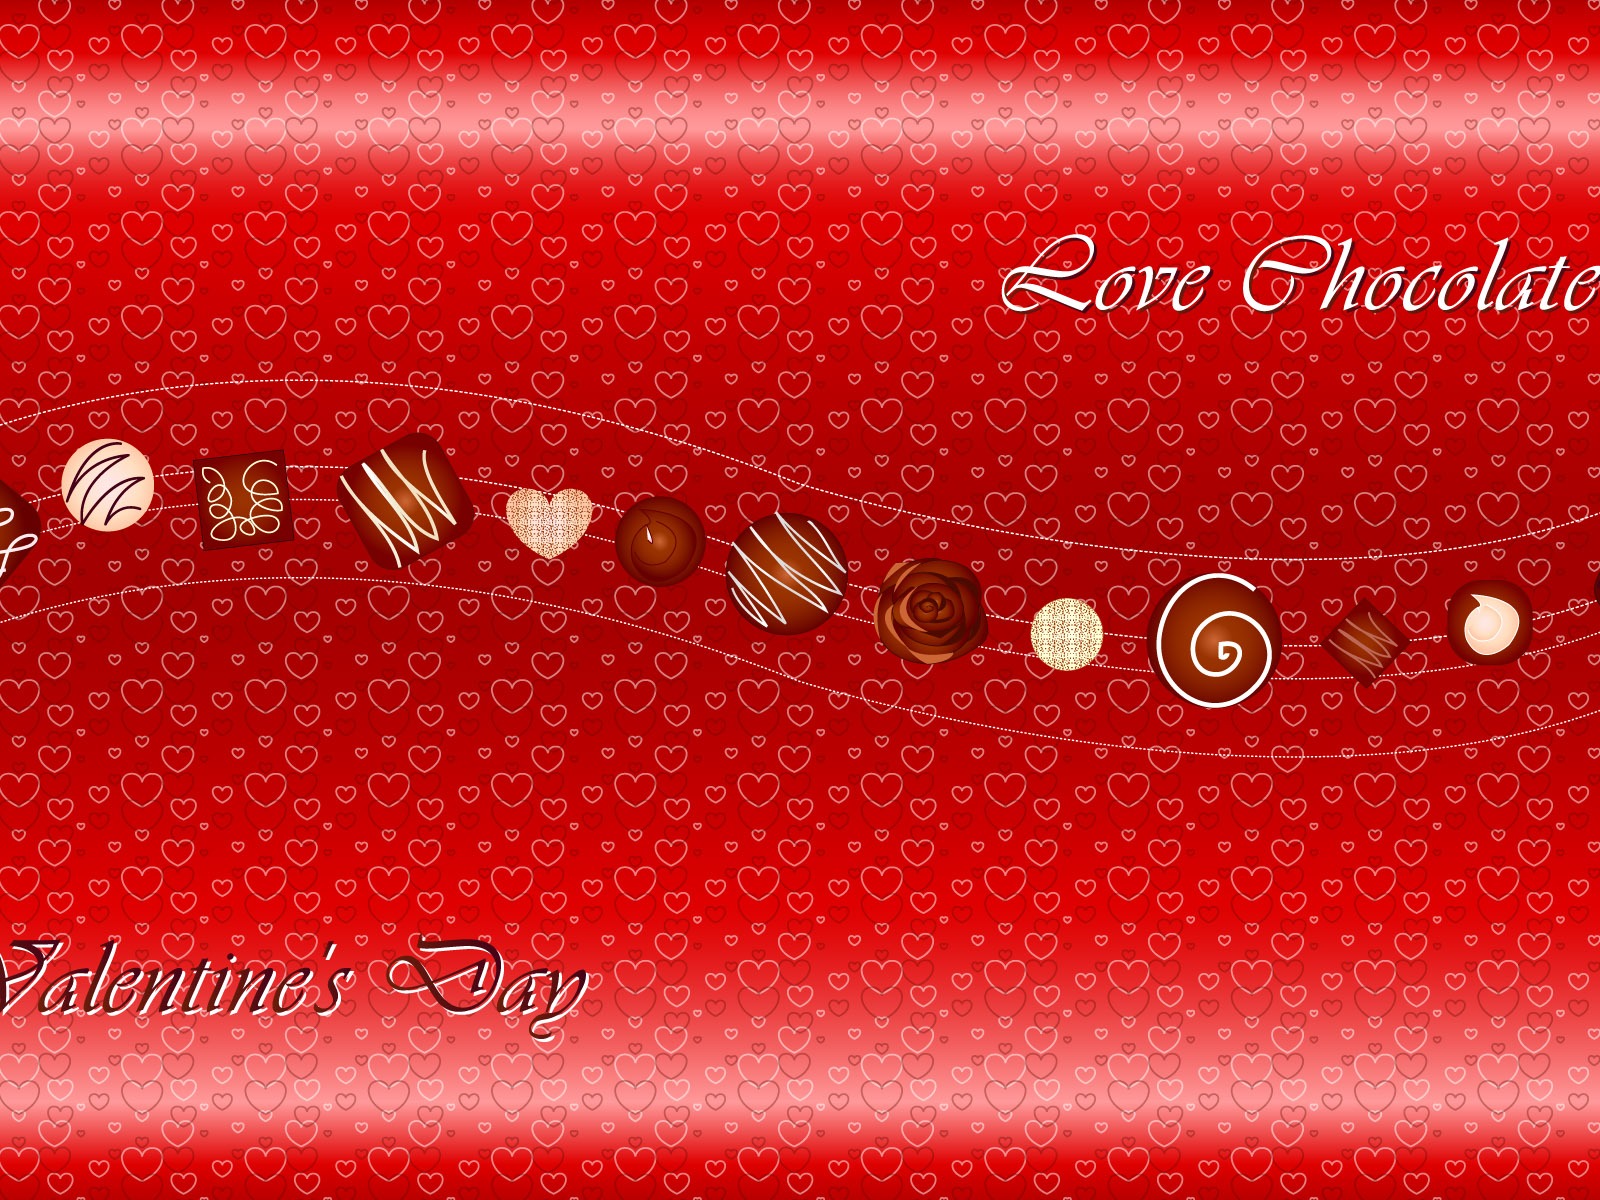 Valentine's Day Theme Wallpapers (1) #2 - 1600x1200